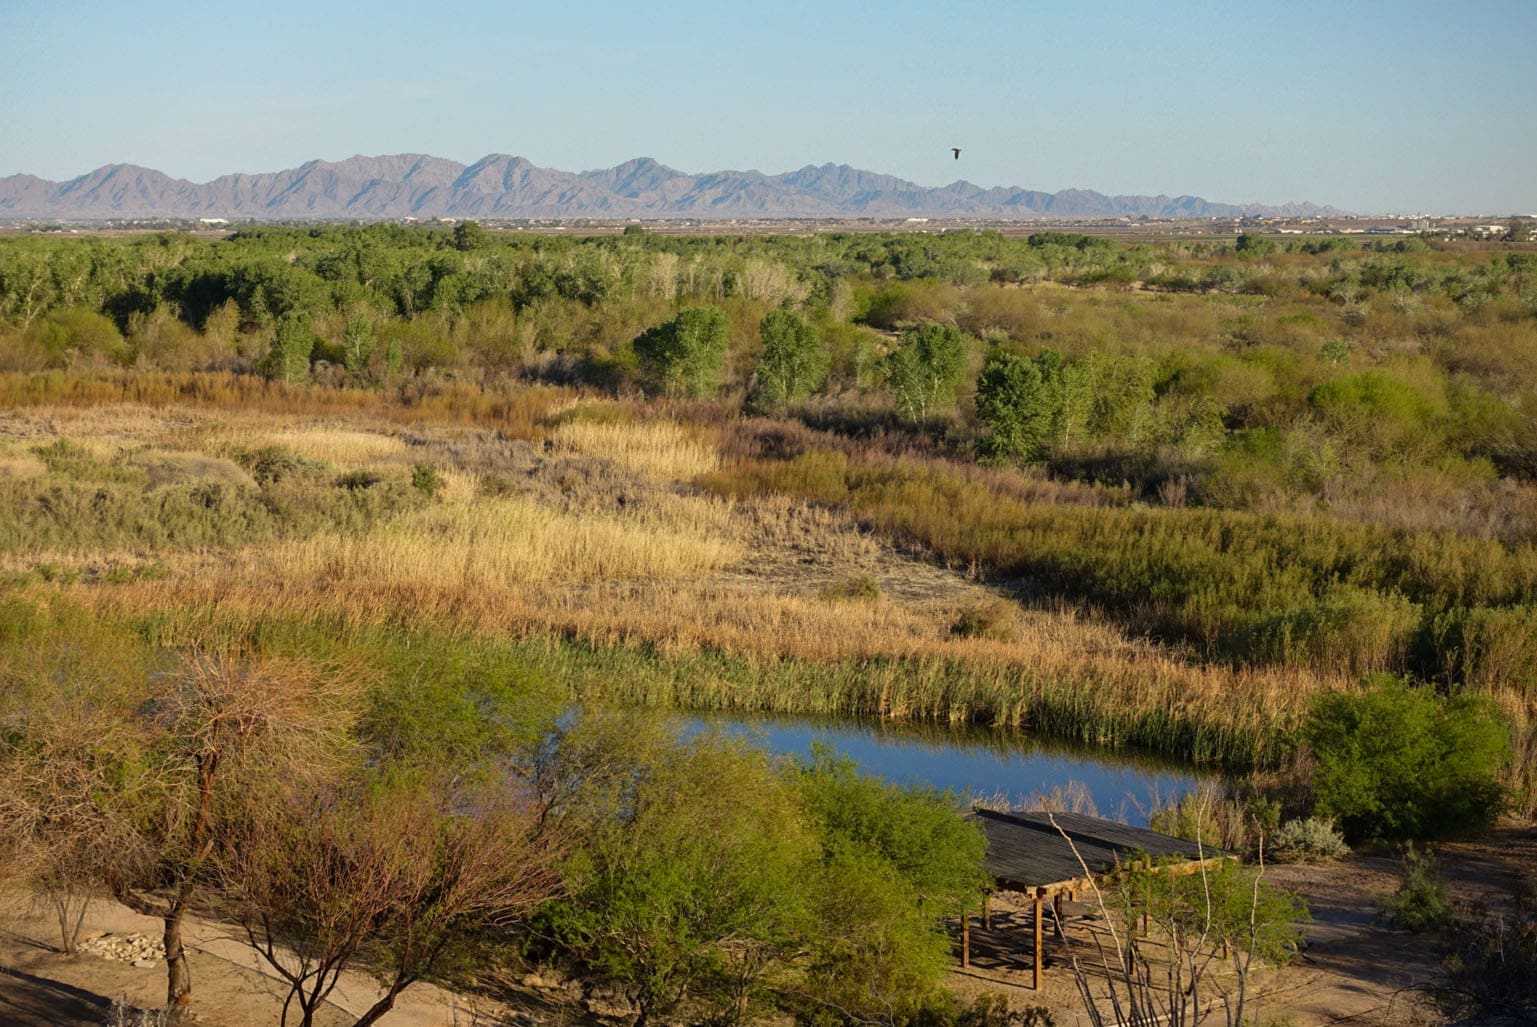 Photograph of river restoration project along the Colorado River depicting green, brown and yellow scenery along water with mountains in the distance.